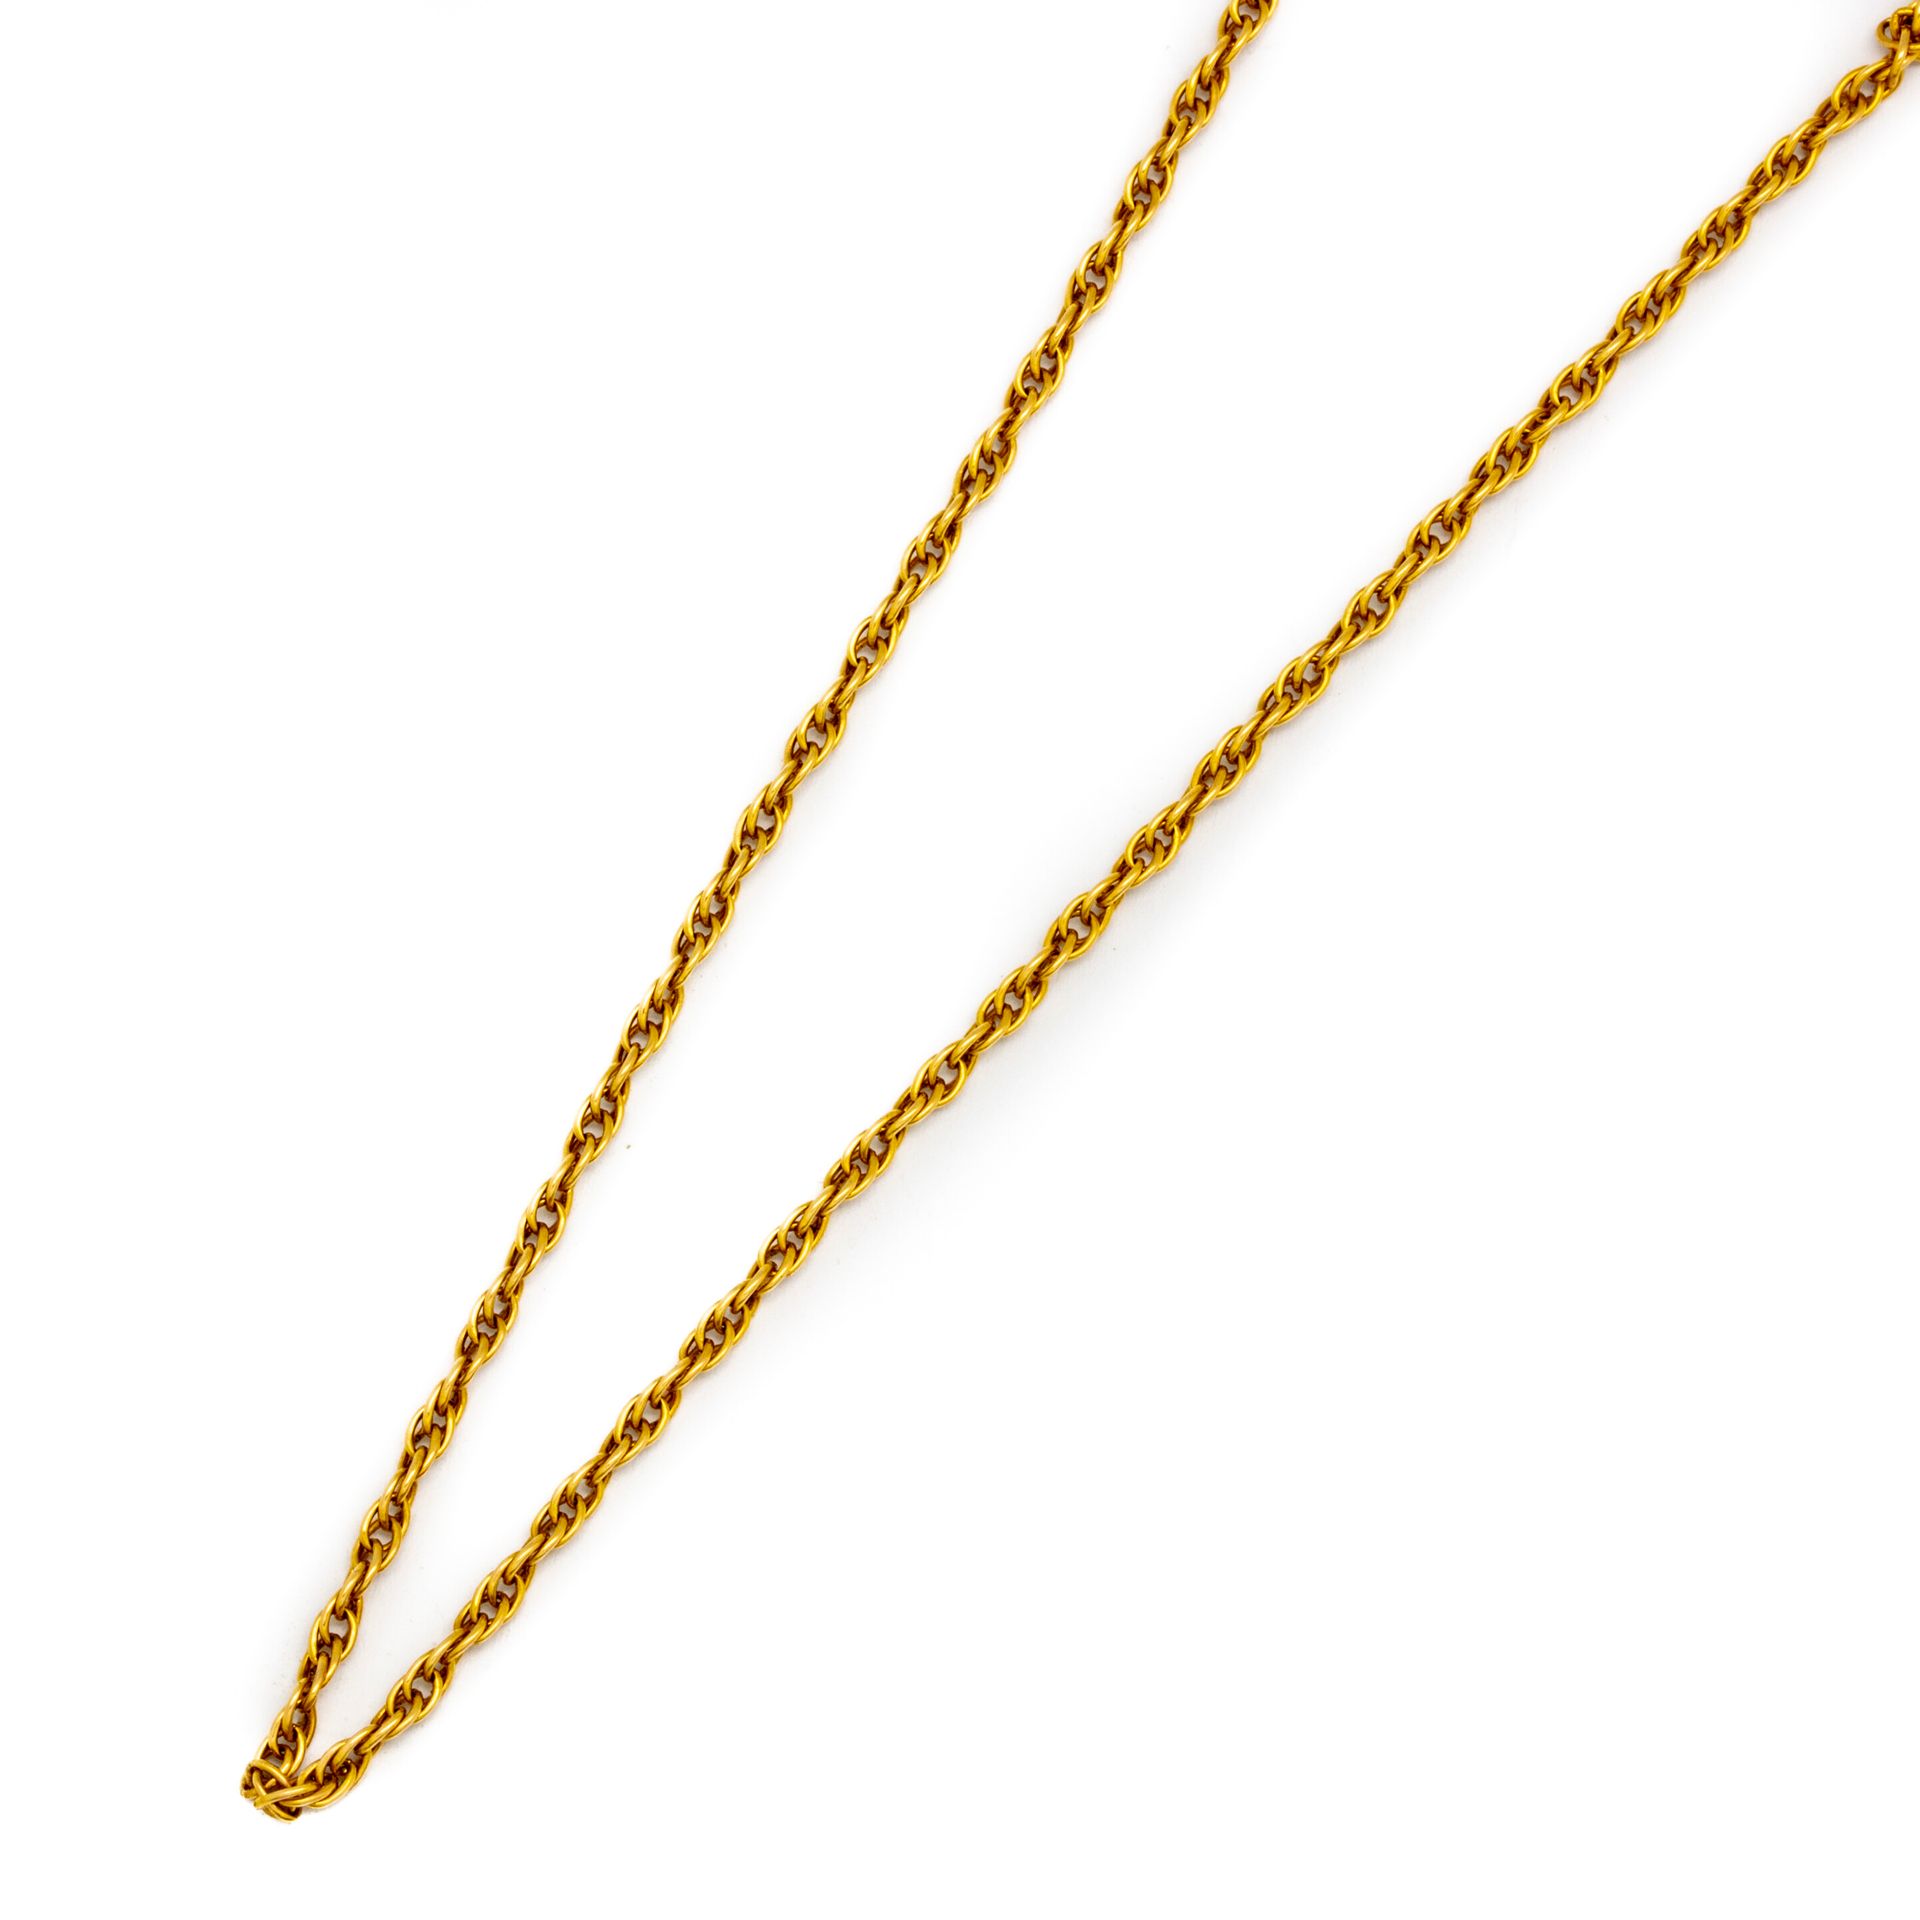 Null Twisted yellow gold chain
Weight : 7,4 g.